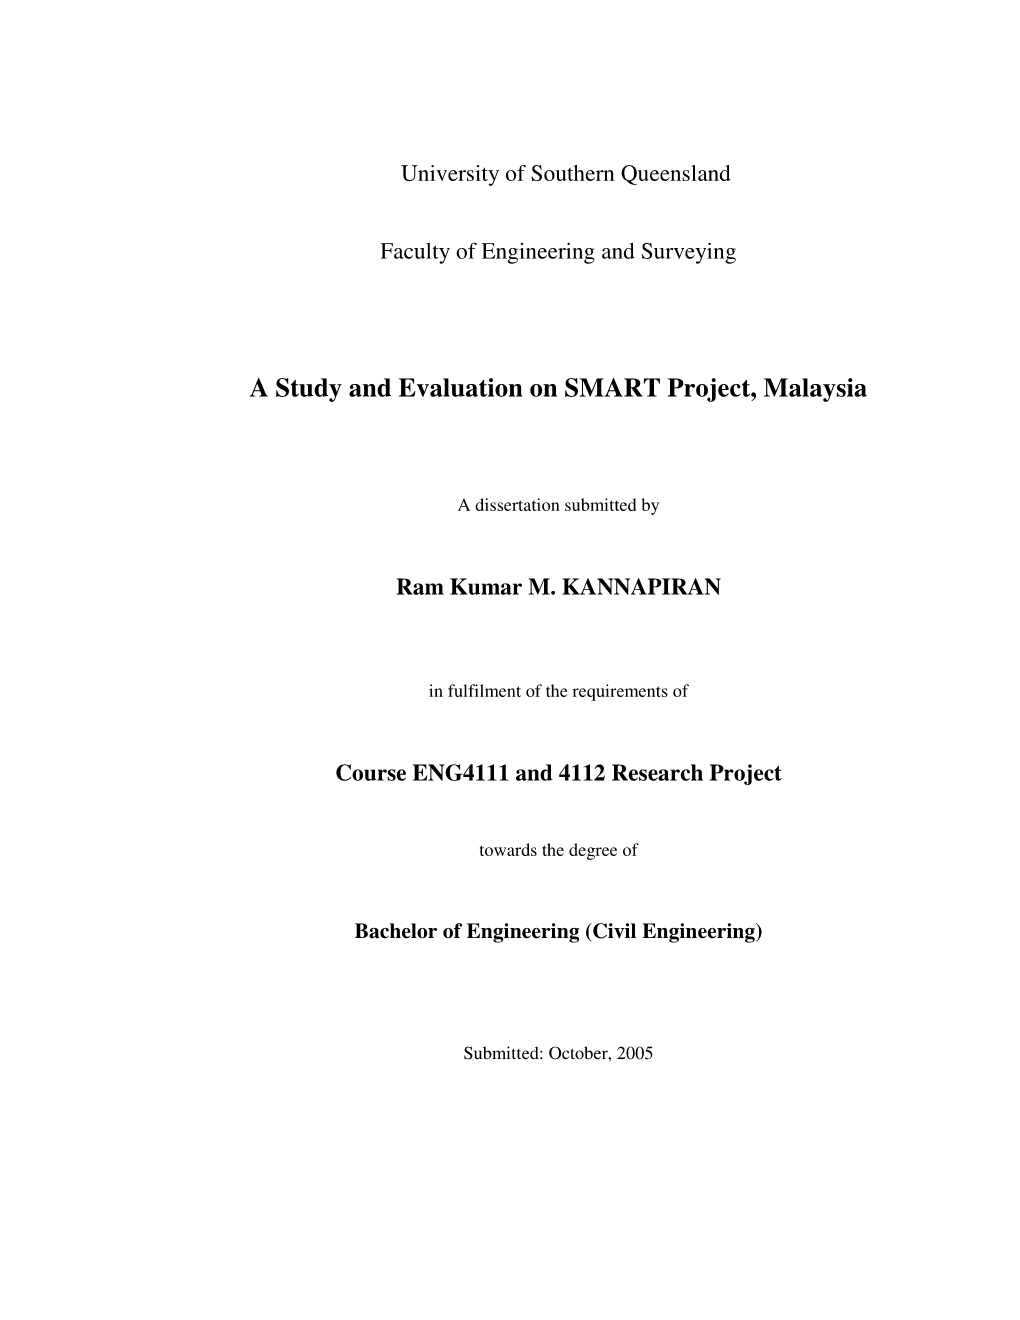 A Study and Evaluation on SMART Project, Malaysia